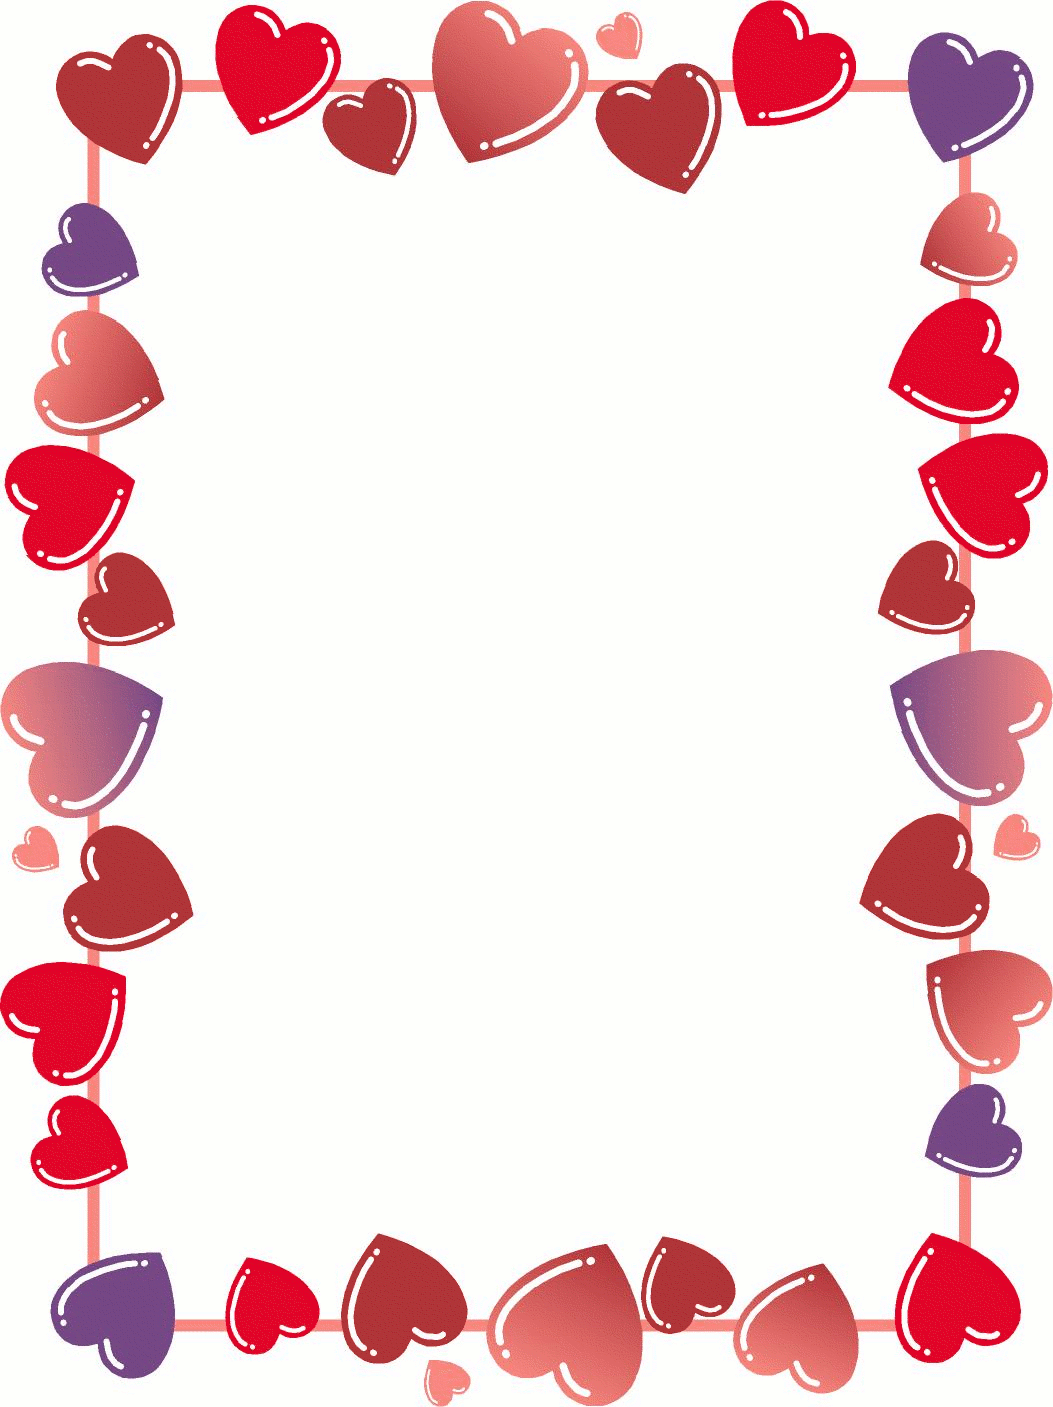 Valentines Day Hearts Border Images & Pictures - Becuo